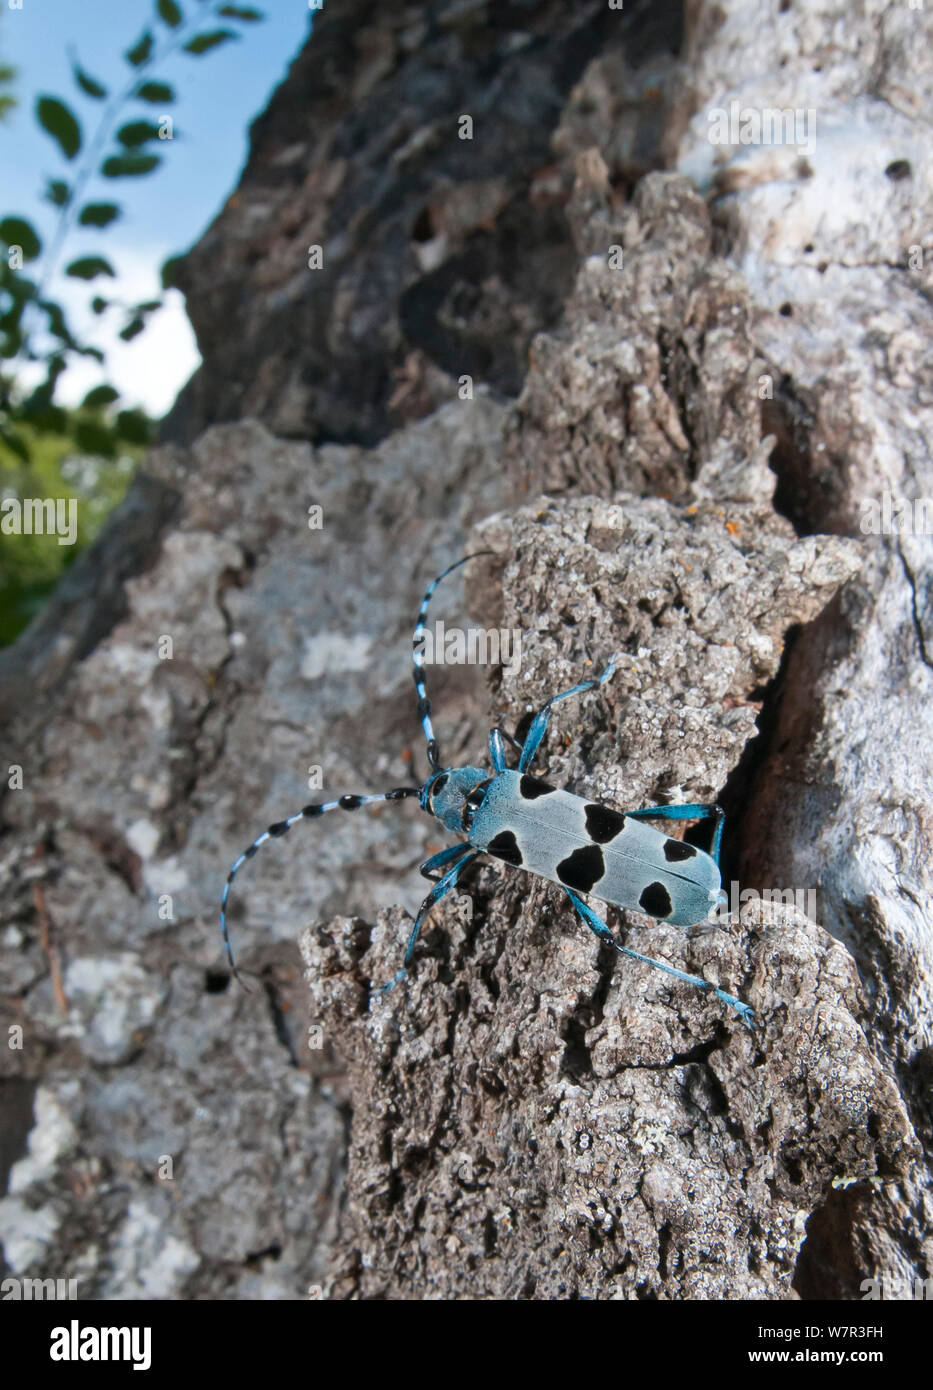 Alpine Longhorn Beetle (Rosalia alpina) a rare and protected longhorn beetle living on rotten chestnut trunks in the Italian Appennines, Camosciara, Italy, July Stock Photo